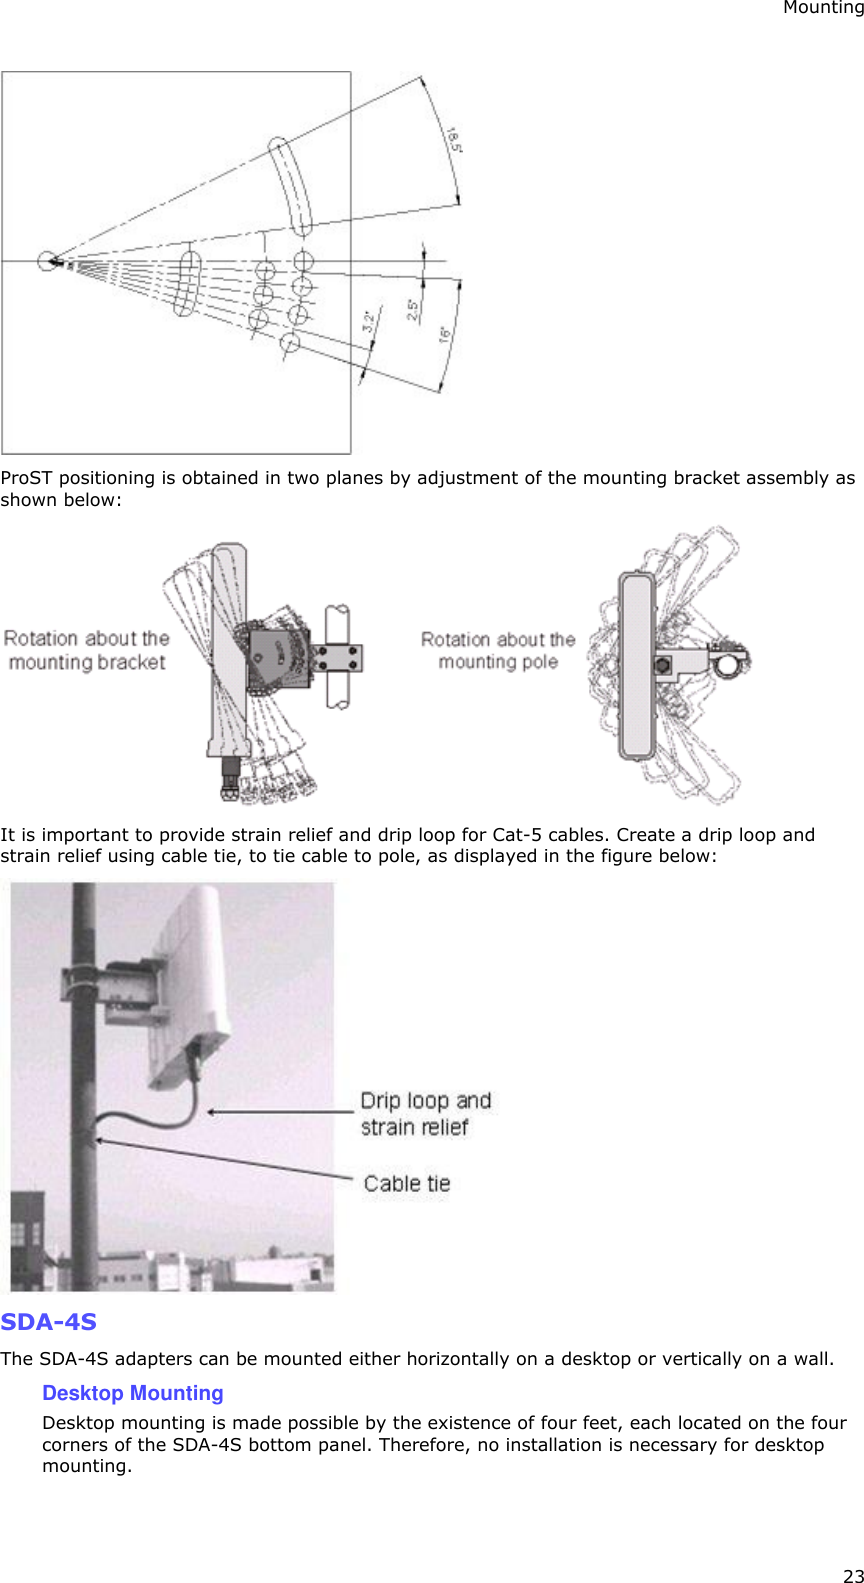 Mounting 23  ProST positioning is obtained in two planes by adjustment of the mounting bracket assembly as shown below:         It is important to provide strain relief and drip loop for Cat-5 cables. Create a drip loop and strain relief using cable tie, to tie cable to pole, as displayed in the figure below:  SDA-4S The SDA-4S adapters can be mounted either horizontally on a desktop or vertically on a wall. Desktop Mounting Desktop mounting is made possible by the existence of four feet, each located on the four corners of the SDA-4S bottom panel. Therefore, no installation is necessary for desktop mounting. 